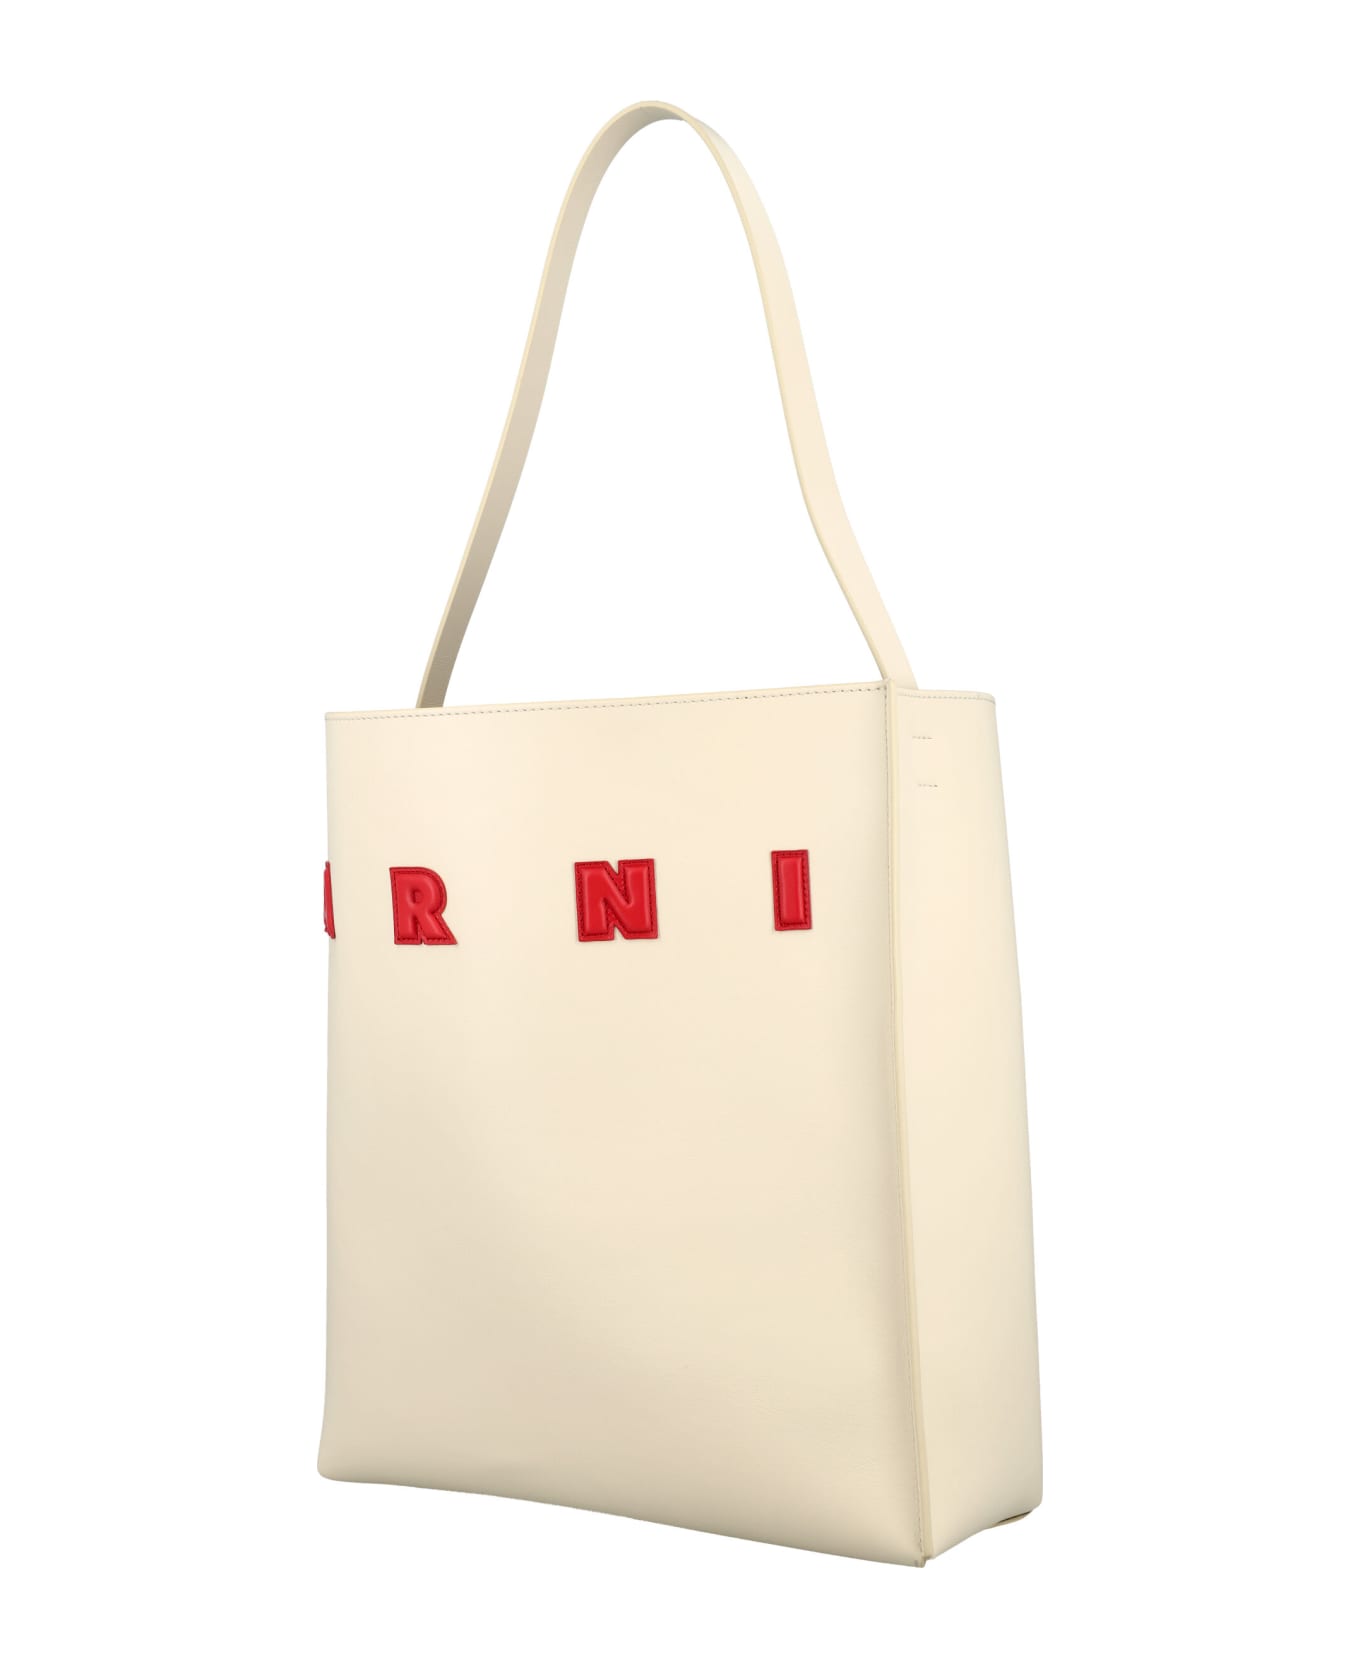 Marni Medium Museum Tote Bag - IVORY RED トートバッグ